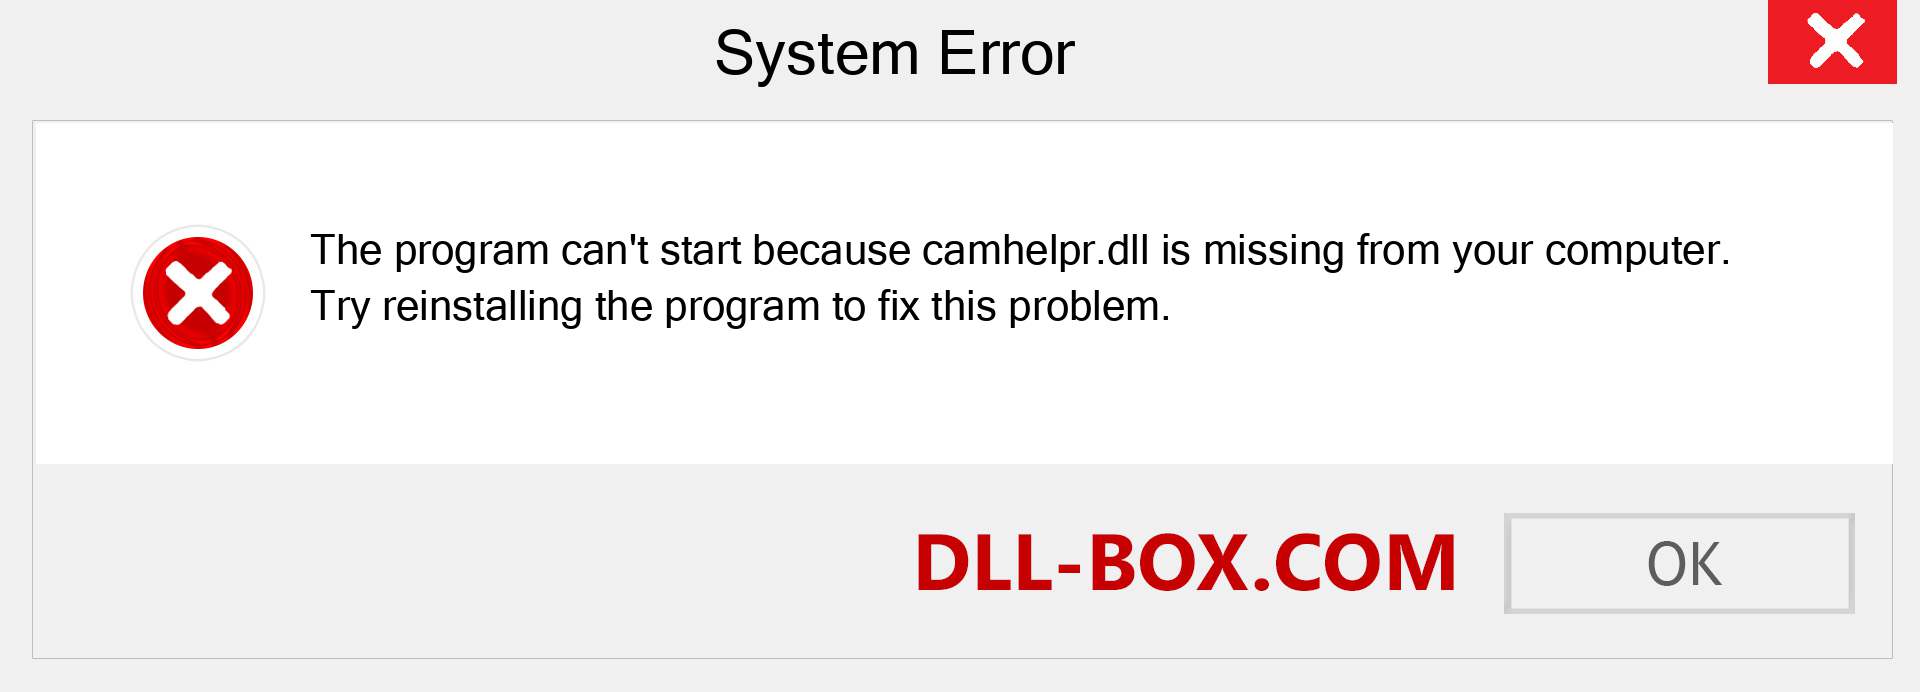  camhelpr.dll file is missing?. Download for Windows 7, 8, 10 - Fix  camhelpr dll Missing Error on Windows, photos, images